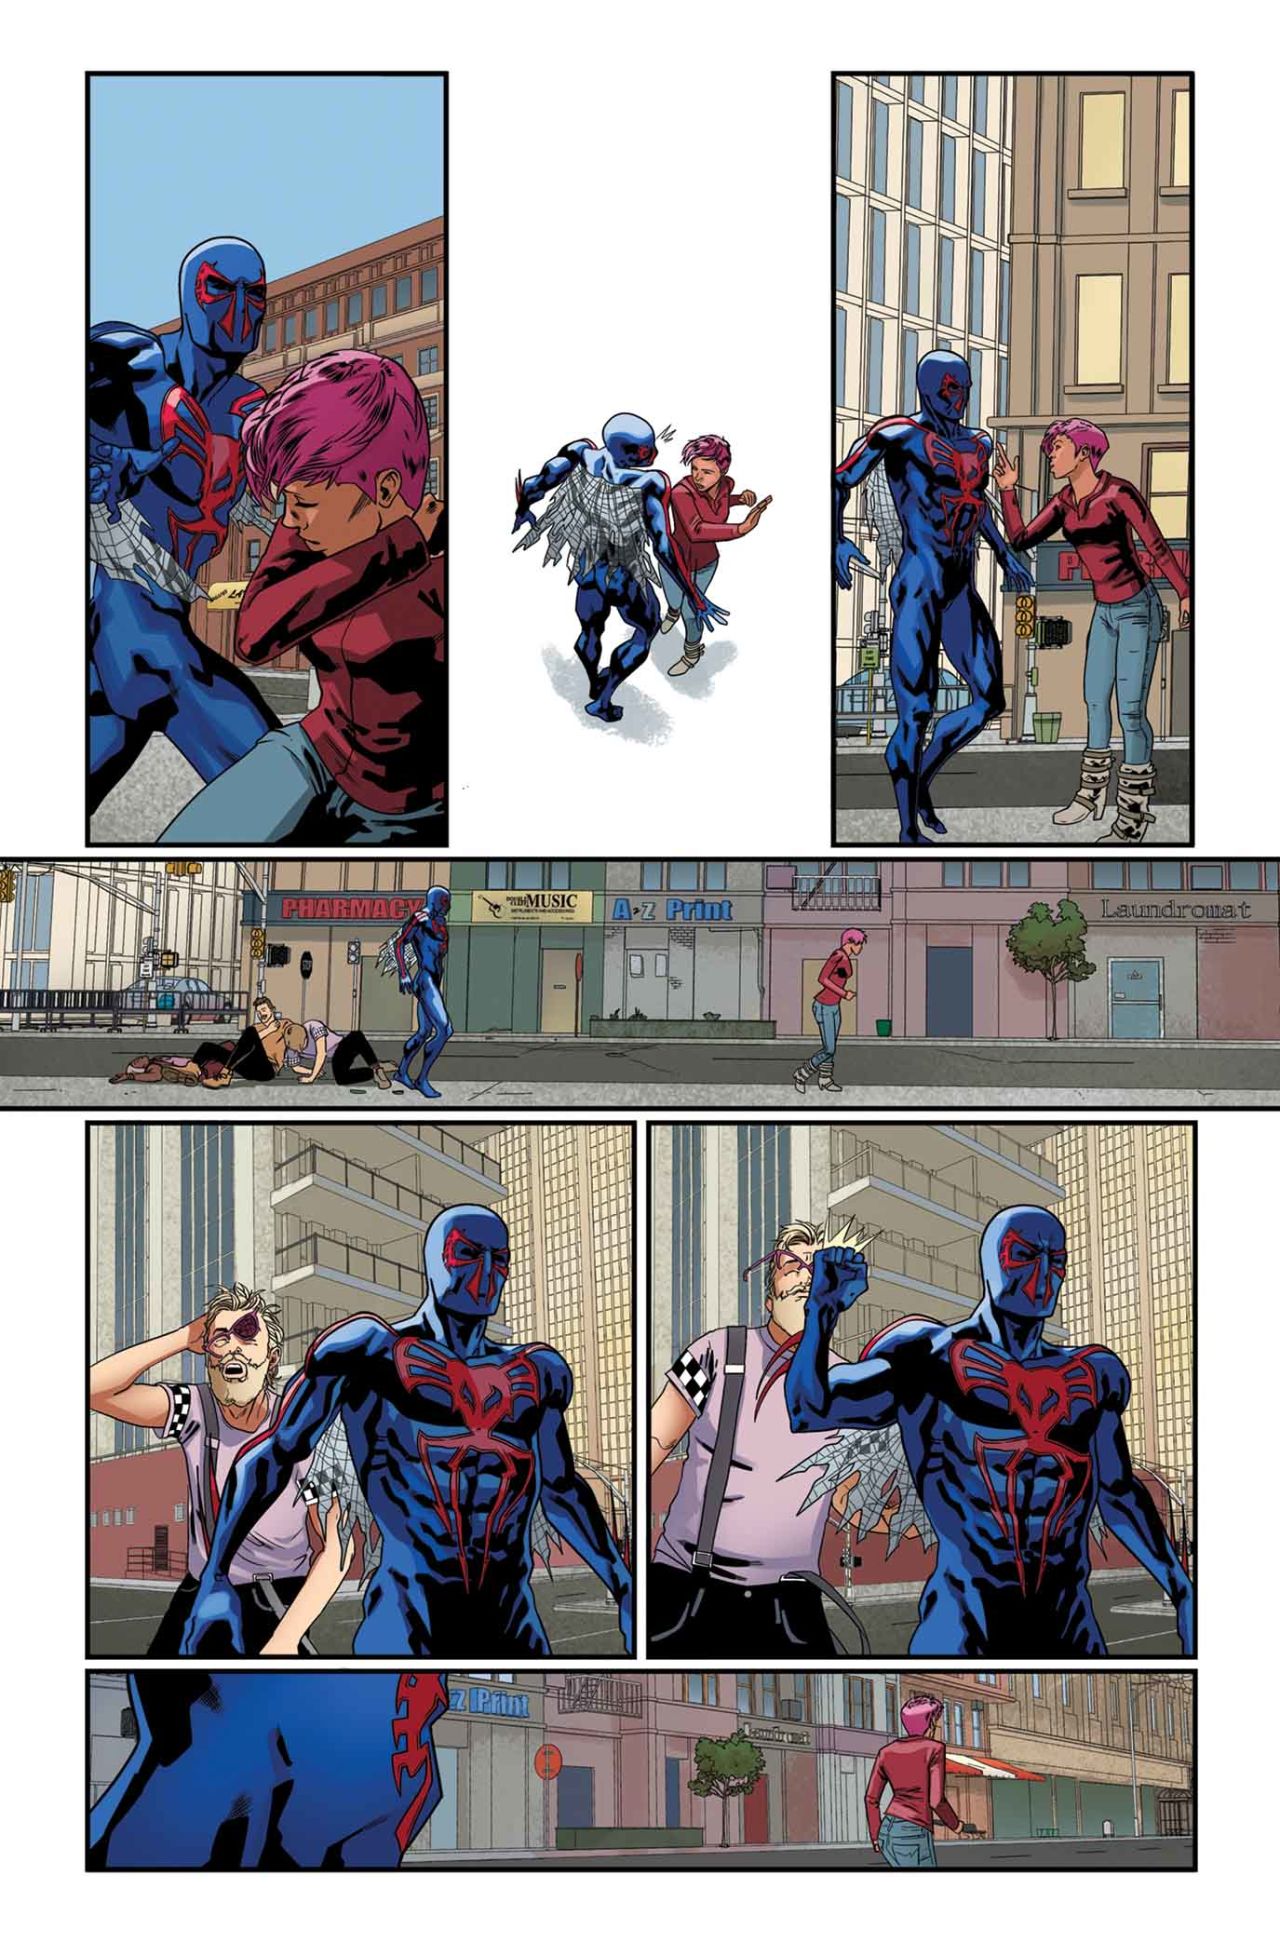 Another page of the "Spider-Man 2099" story from "Amazing Spider-Man" #1.